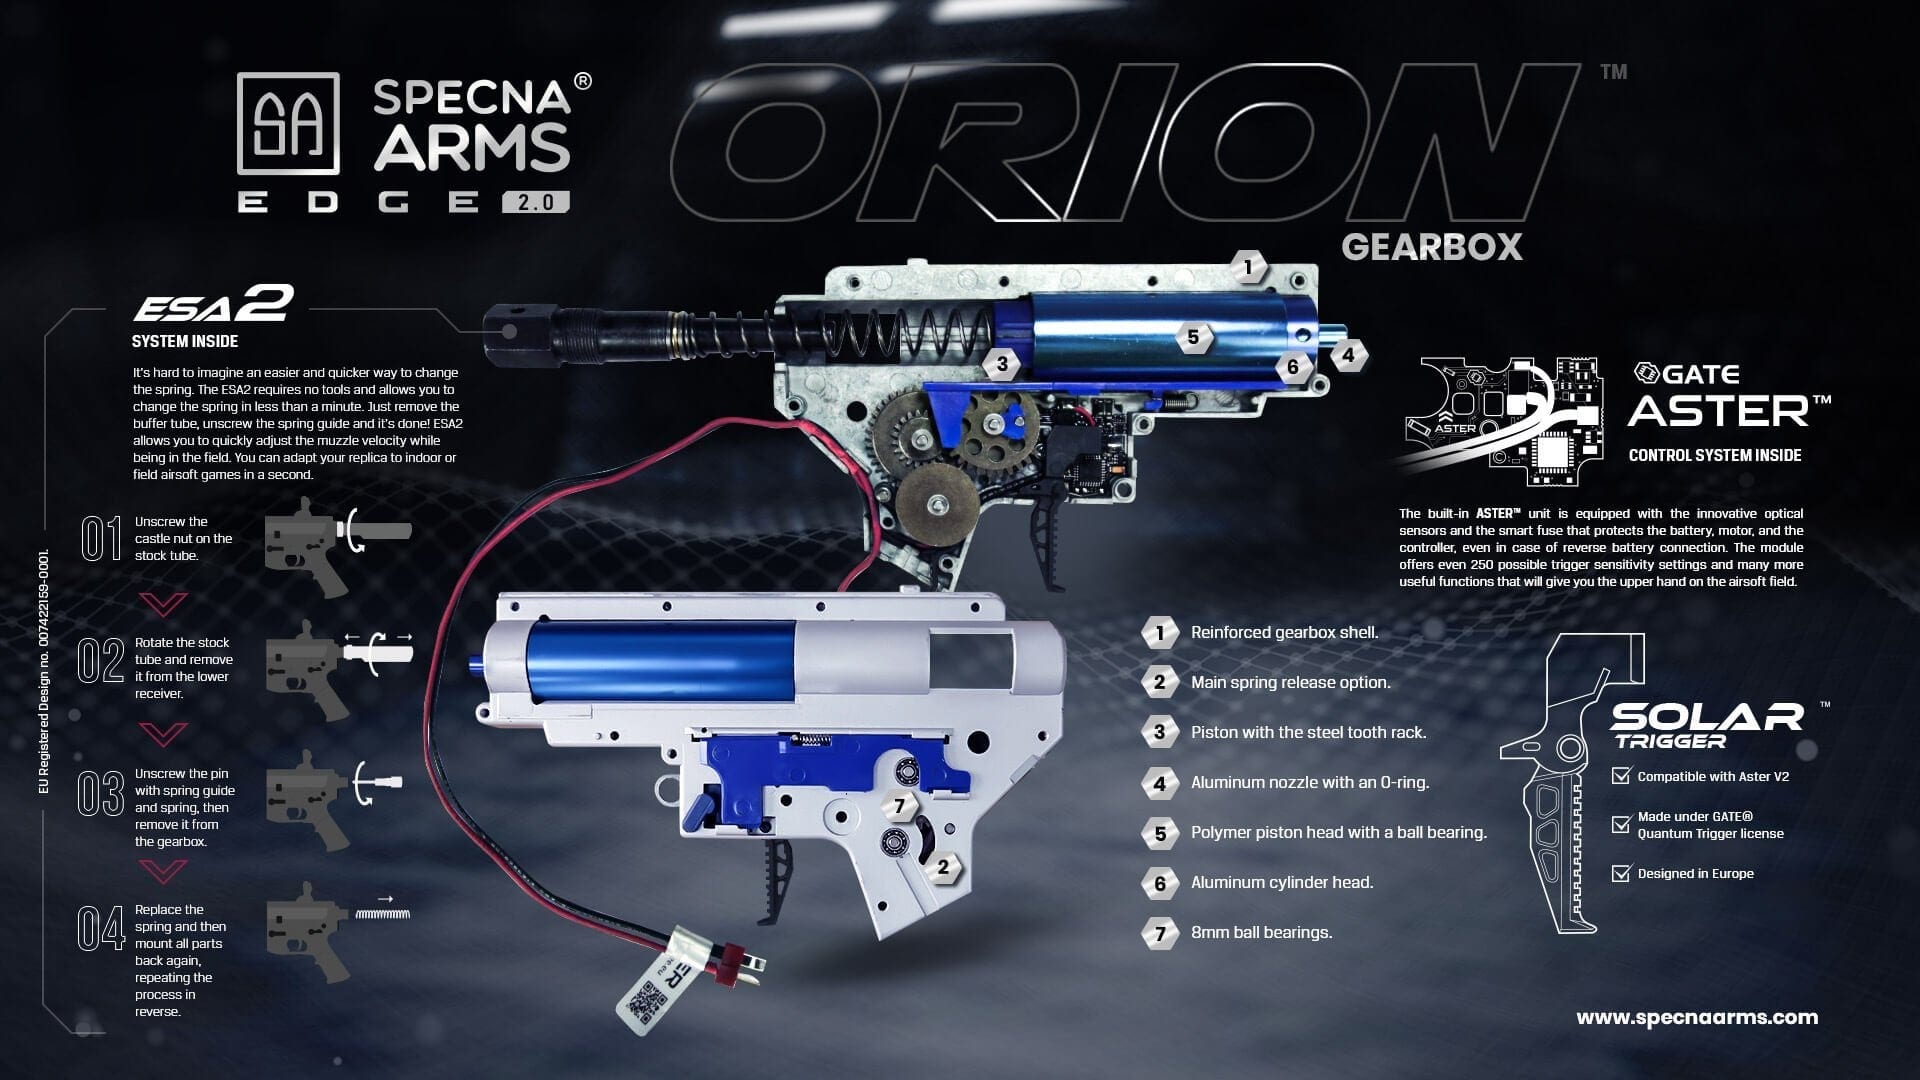 Specna Arms Orion Gearbox